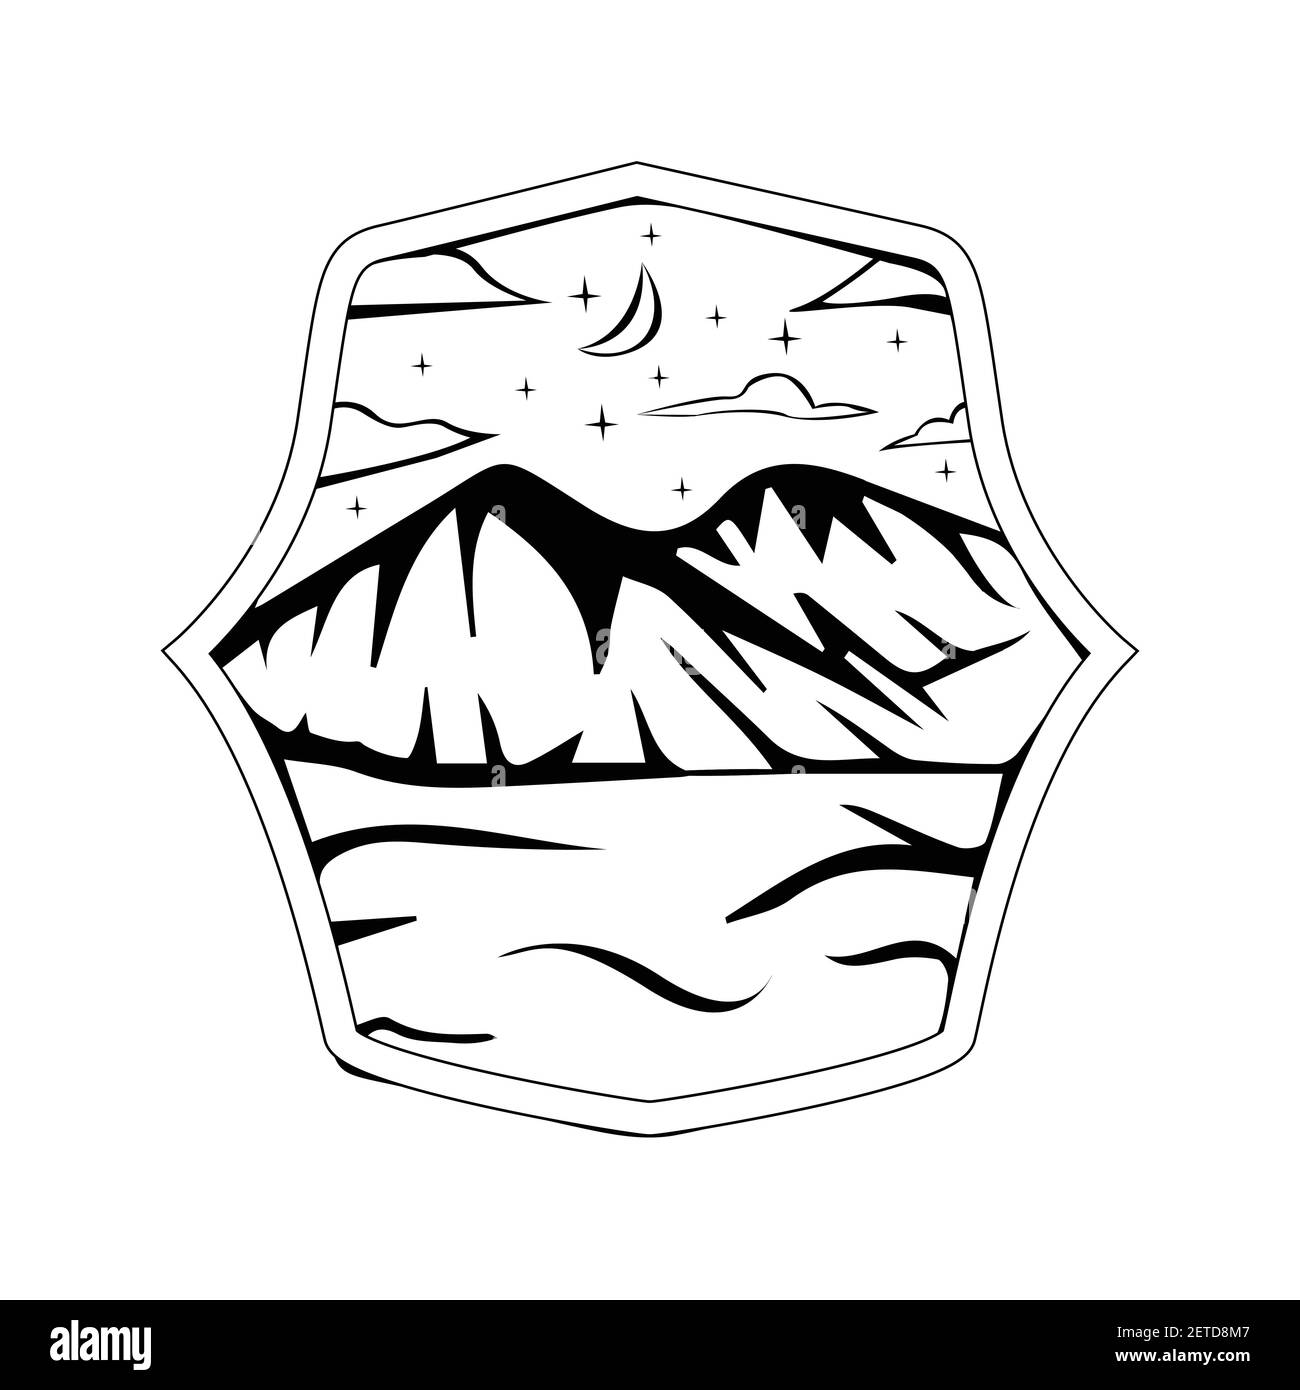 Starry night Ice land badge vector. Starry view with mountain illustration. Stock Vector